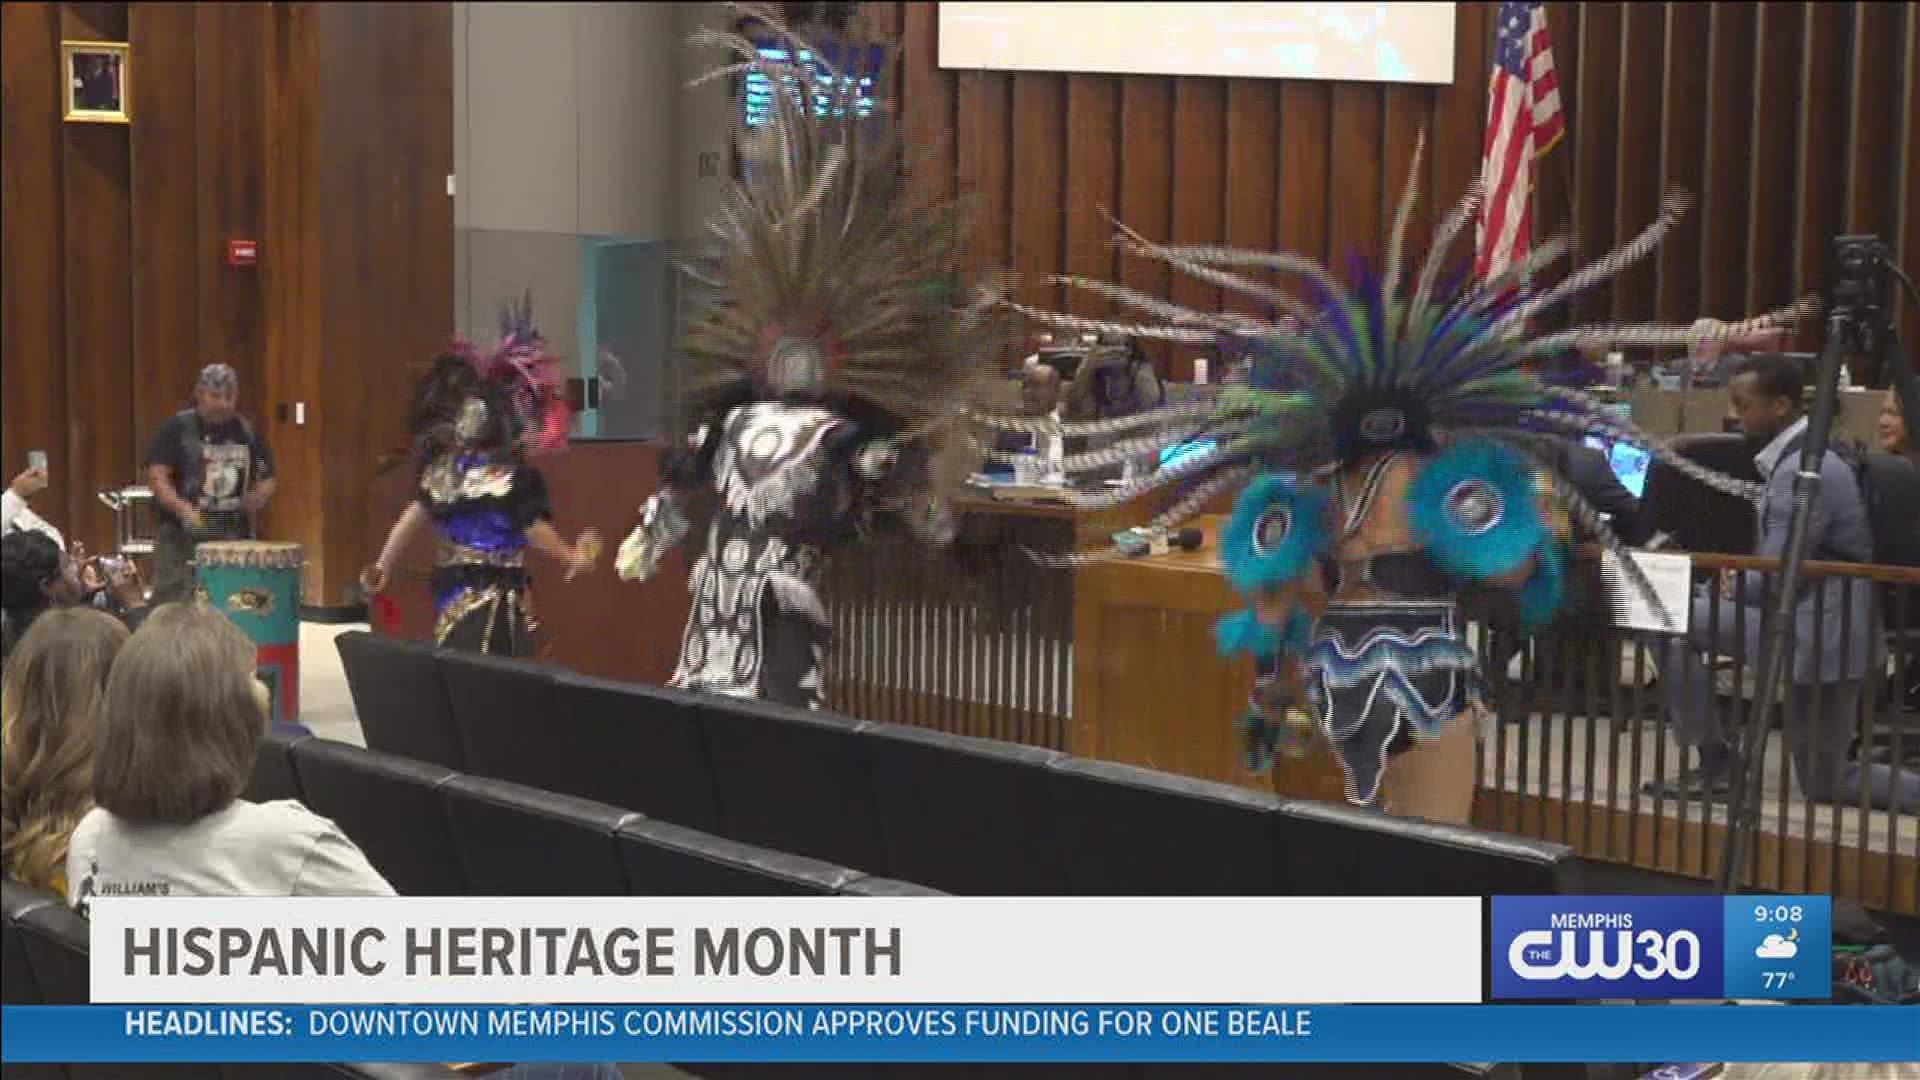 September has been recognized as Hispanic Heritage Month in Memphis.